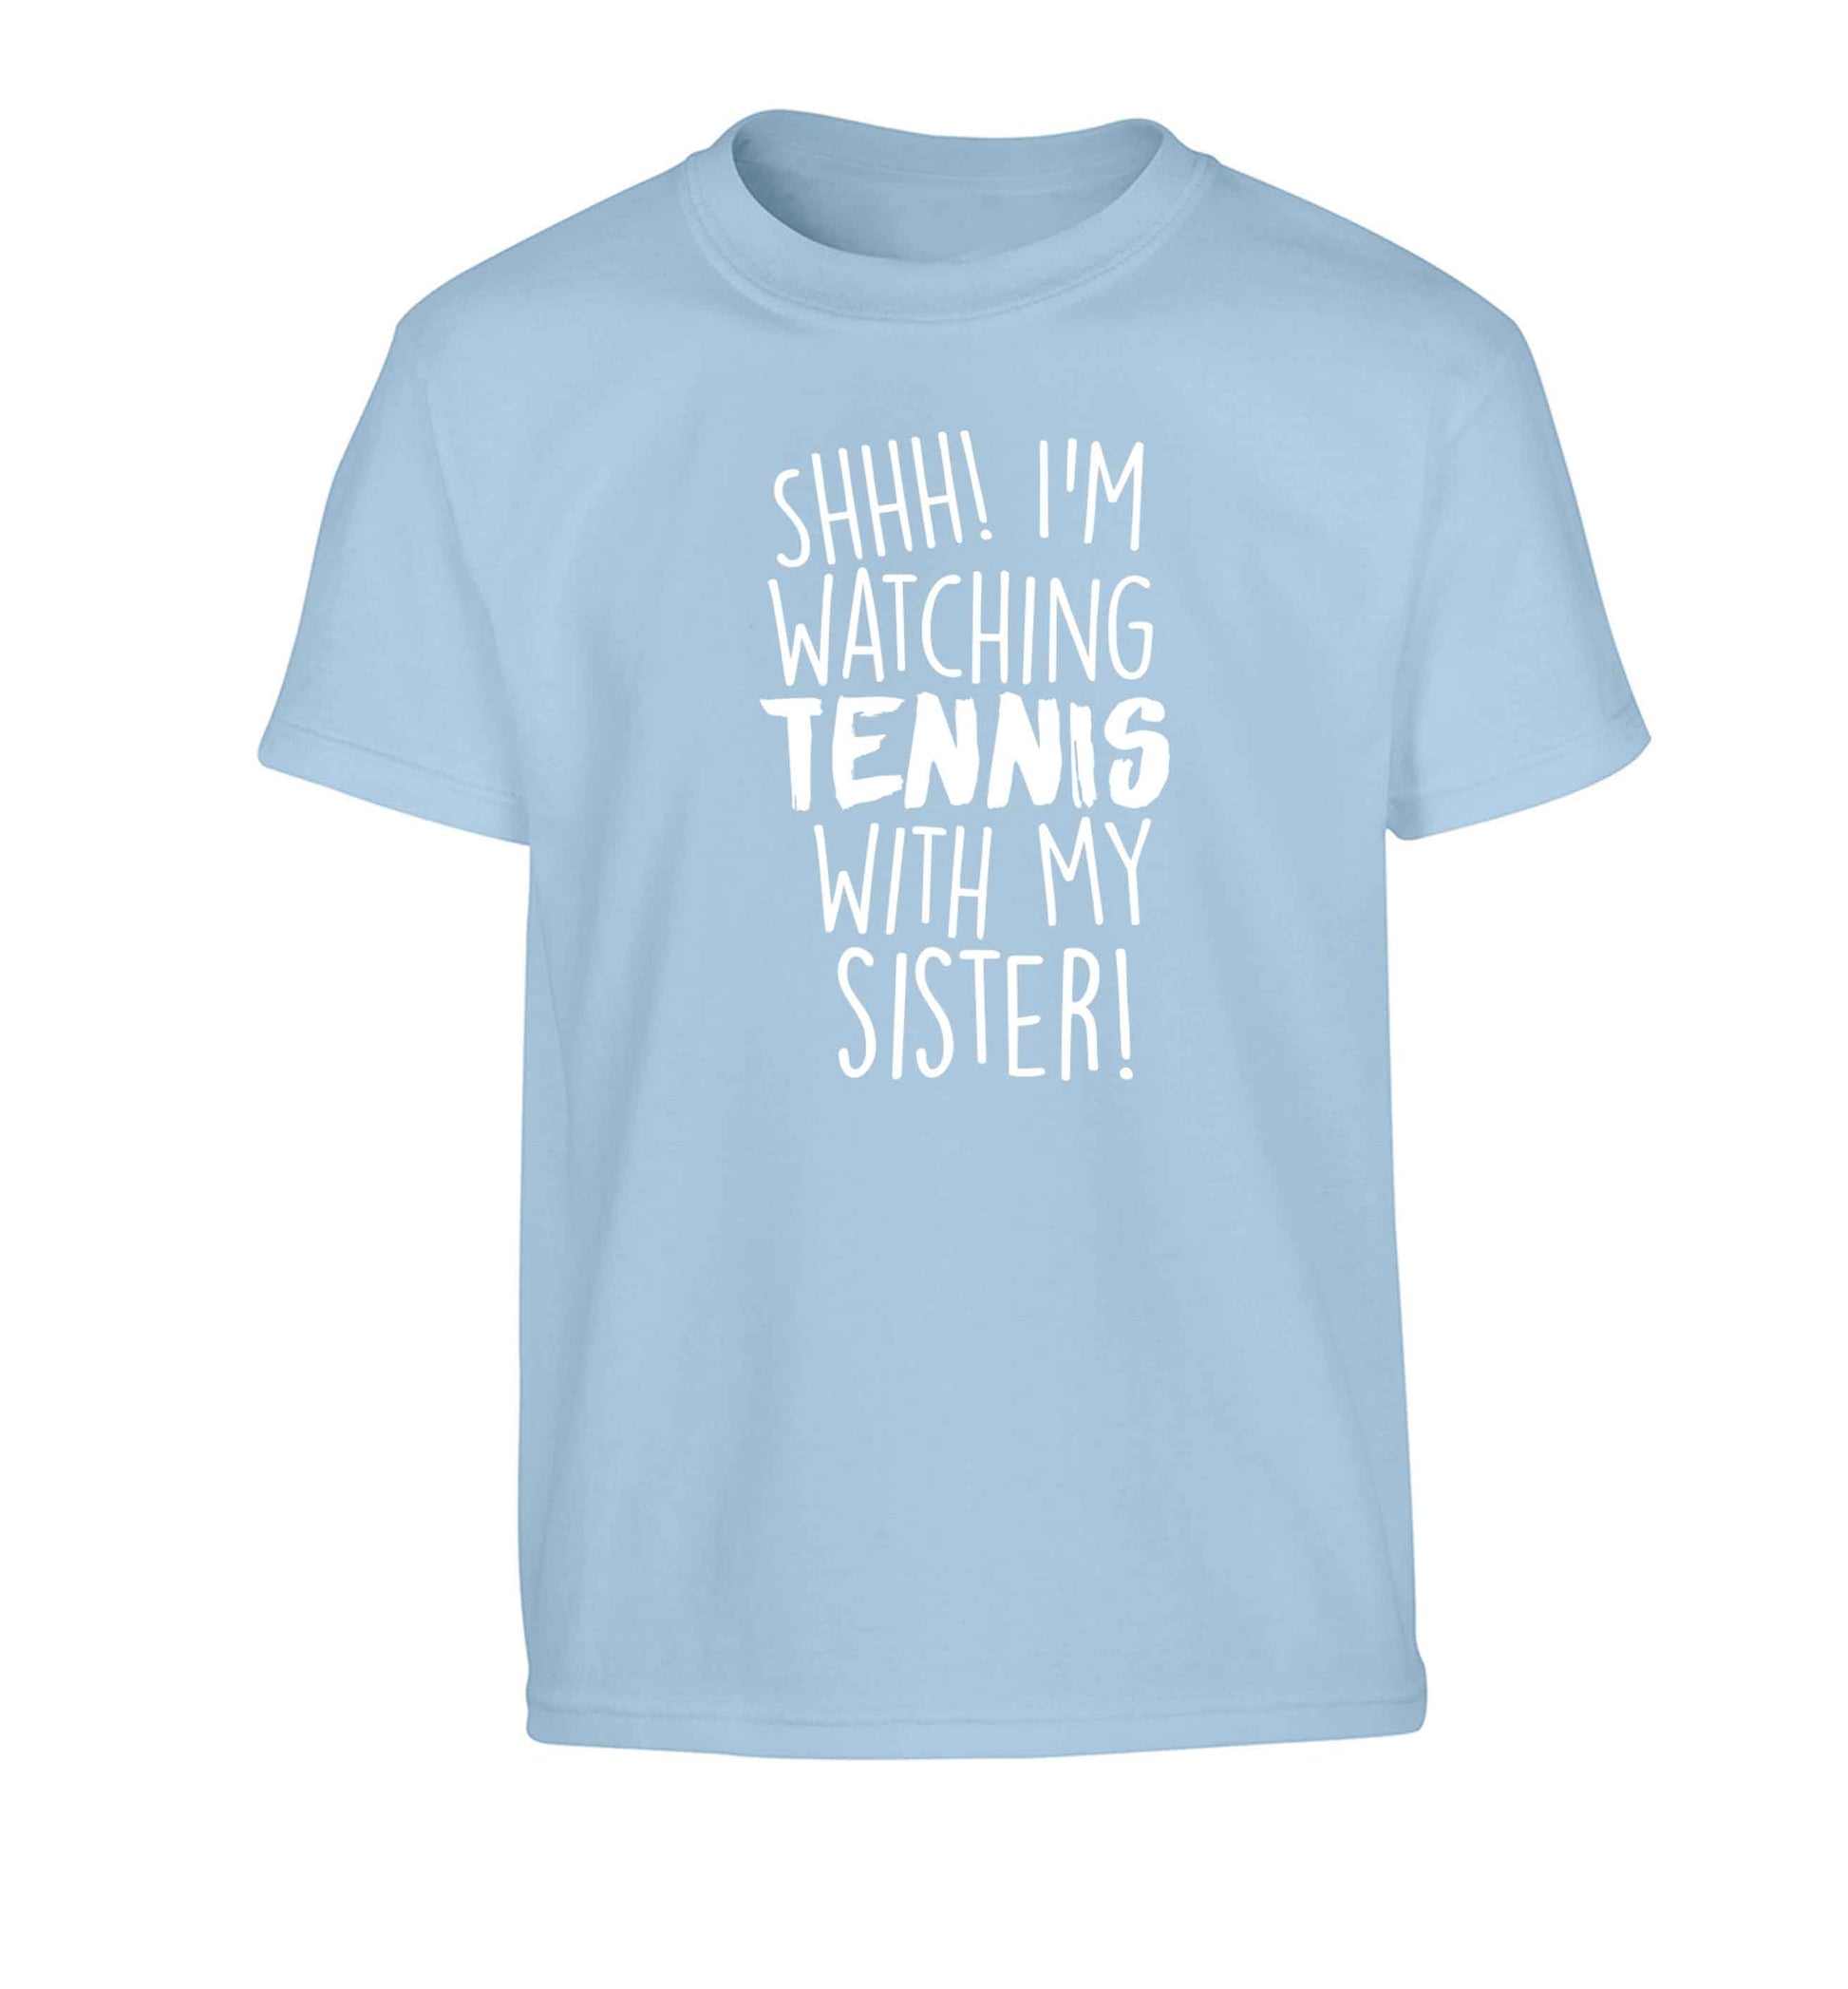 Shh! I'm watching tennis with my sister! Children's light blue Tshirt 12-13 Years